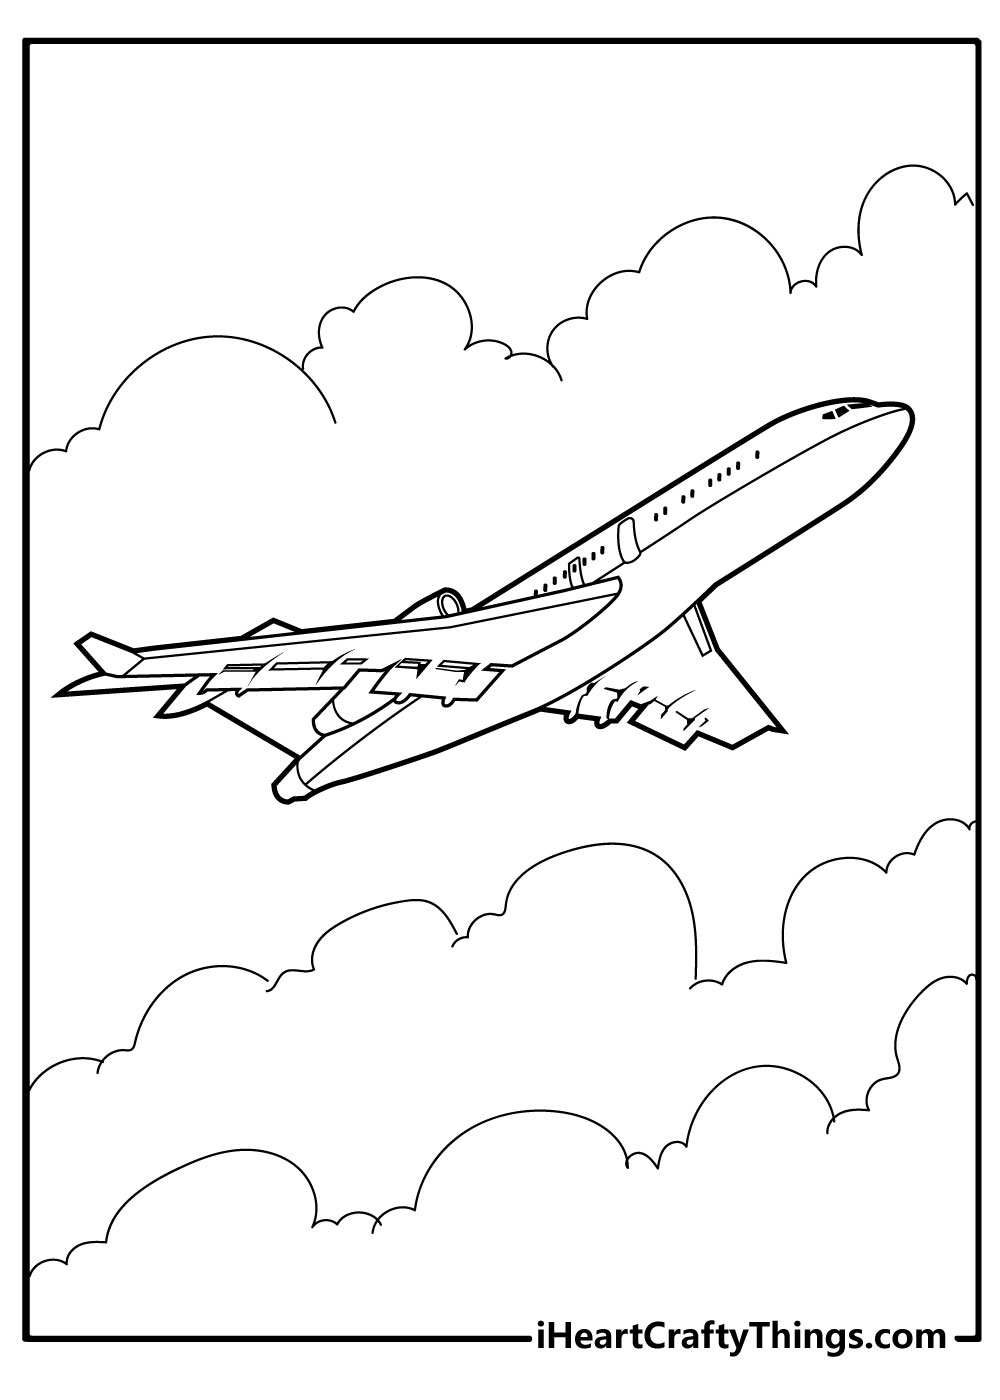 Airplane Coloring Pages free download for preschoolers